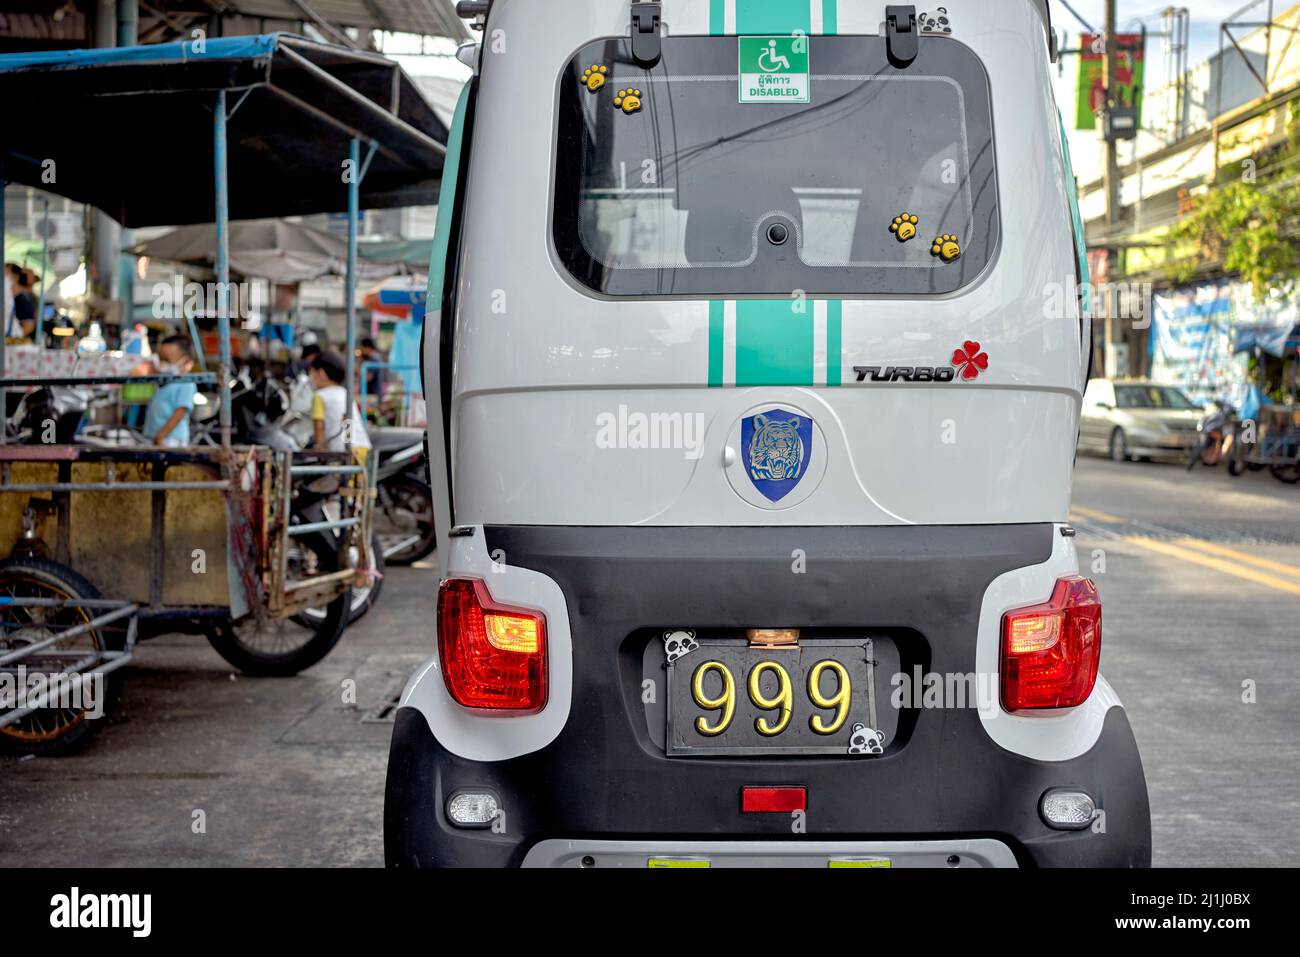 999 lucky number plate which is considered a very lucky number in Thailand. Southeast Asia Stock Photo